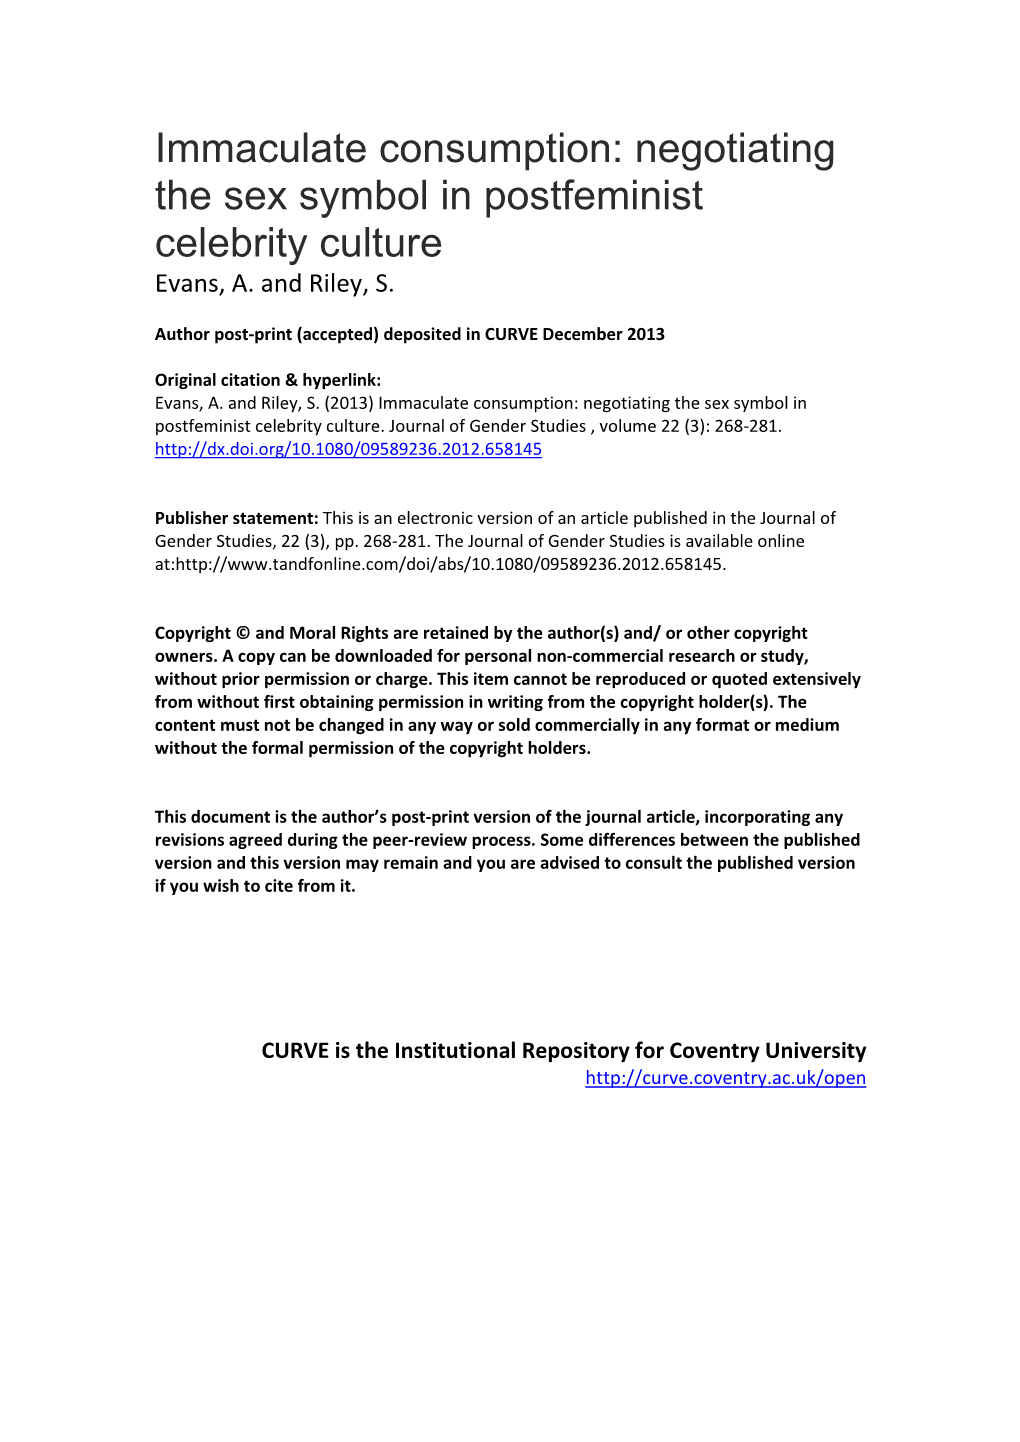 Immaculate Consumption: Negotiating the Sex Symbol in Postfeminist Celebrity Culture Evans, A